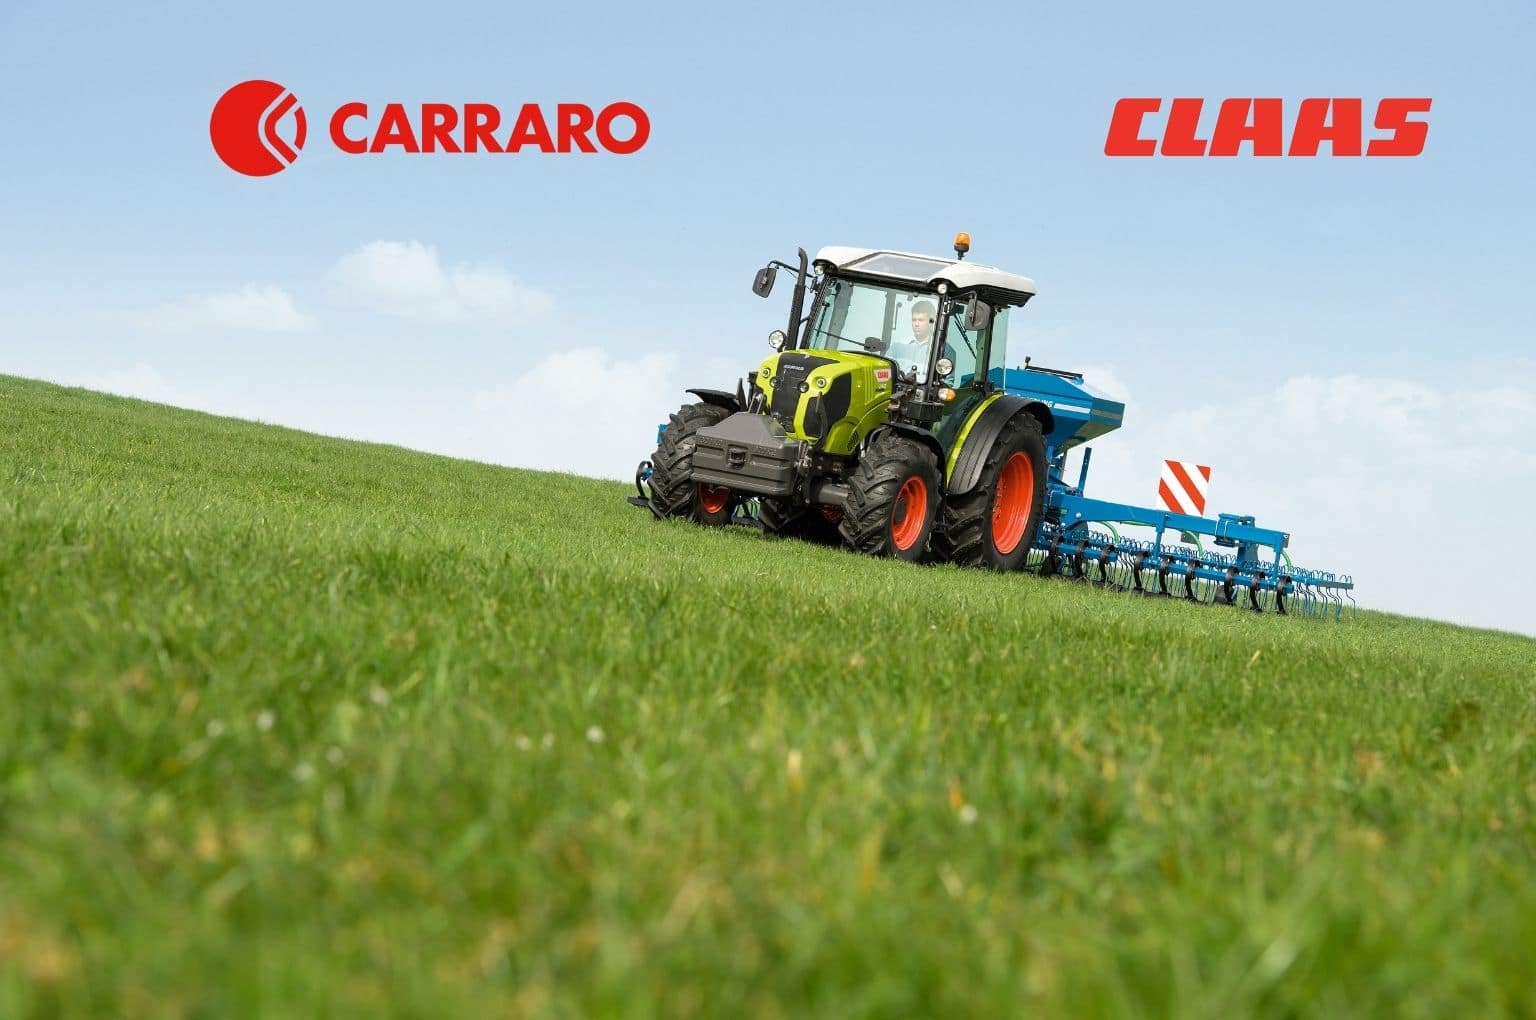 Claas and Carraro